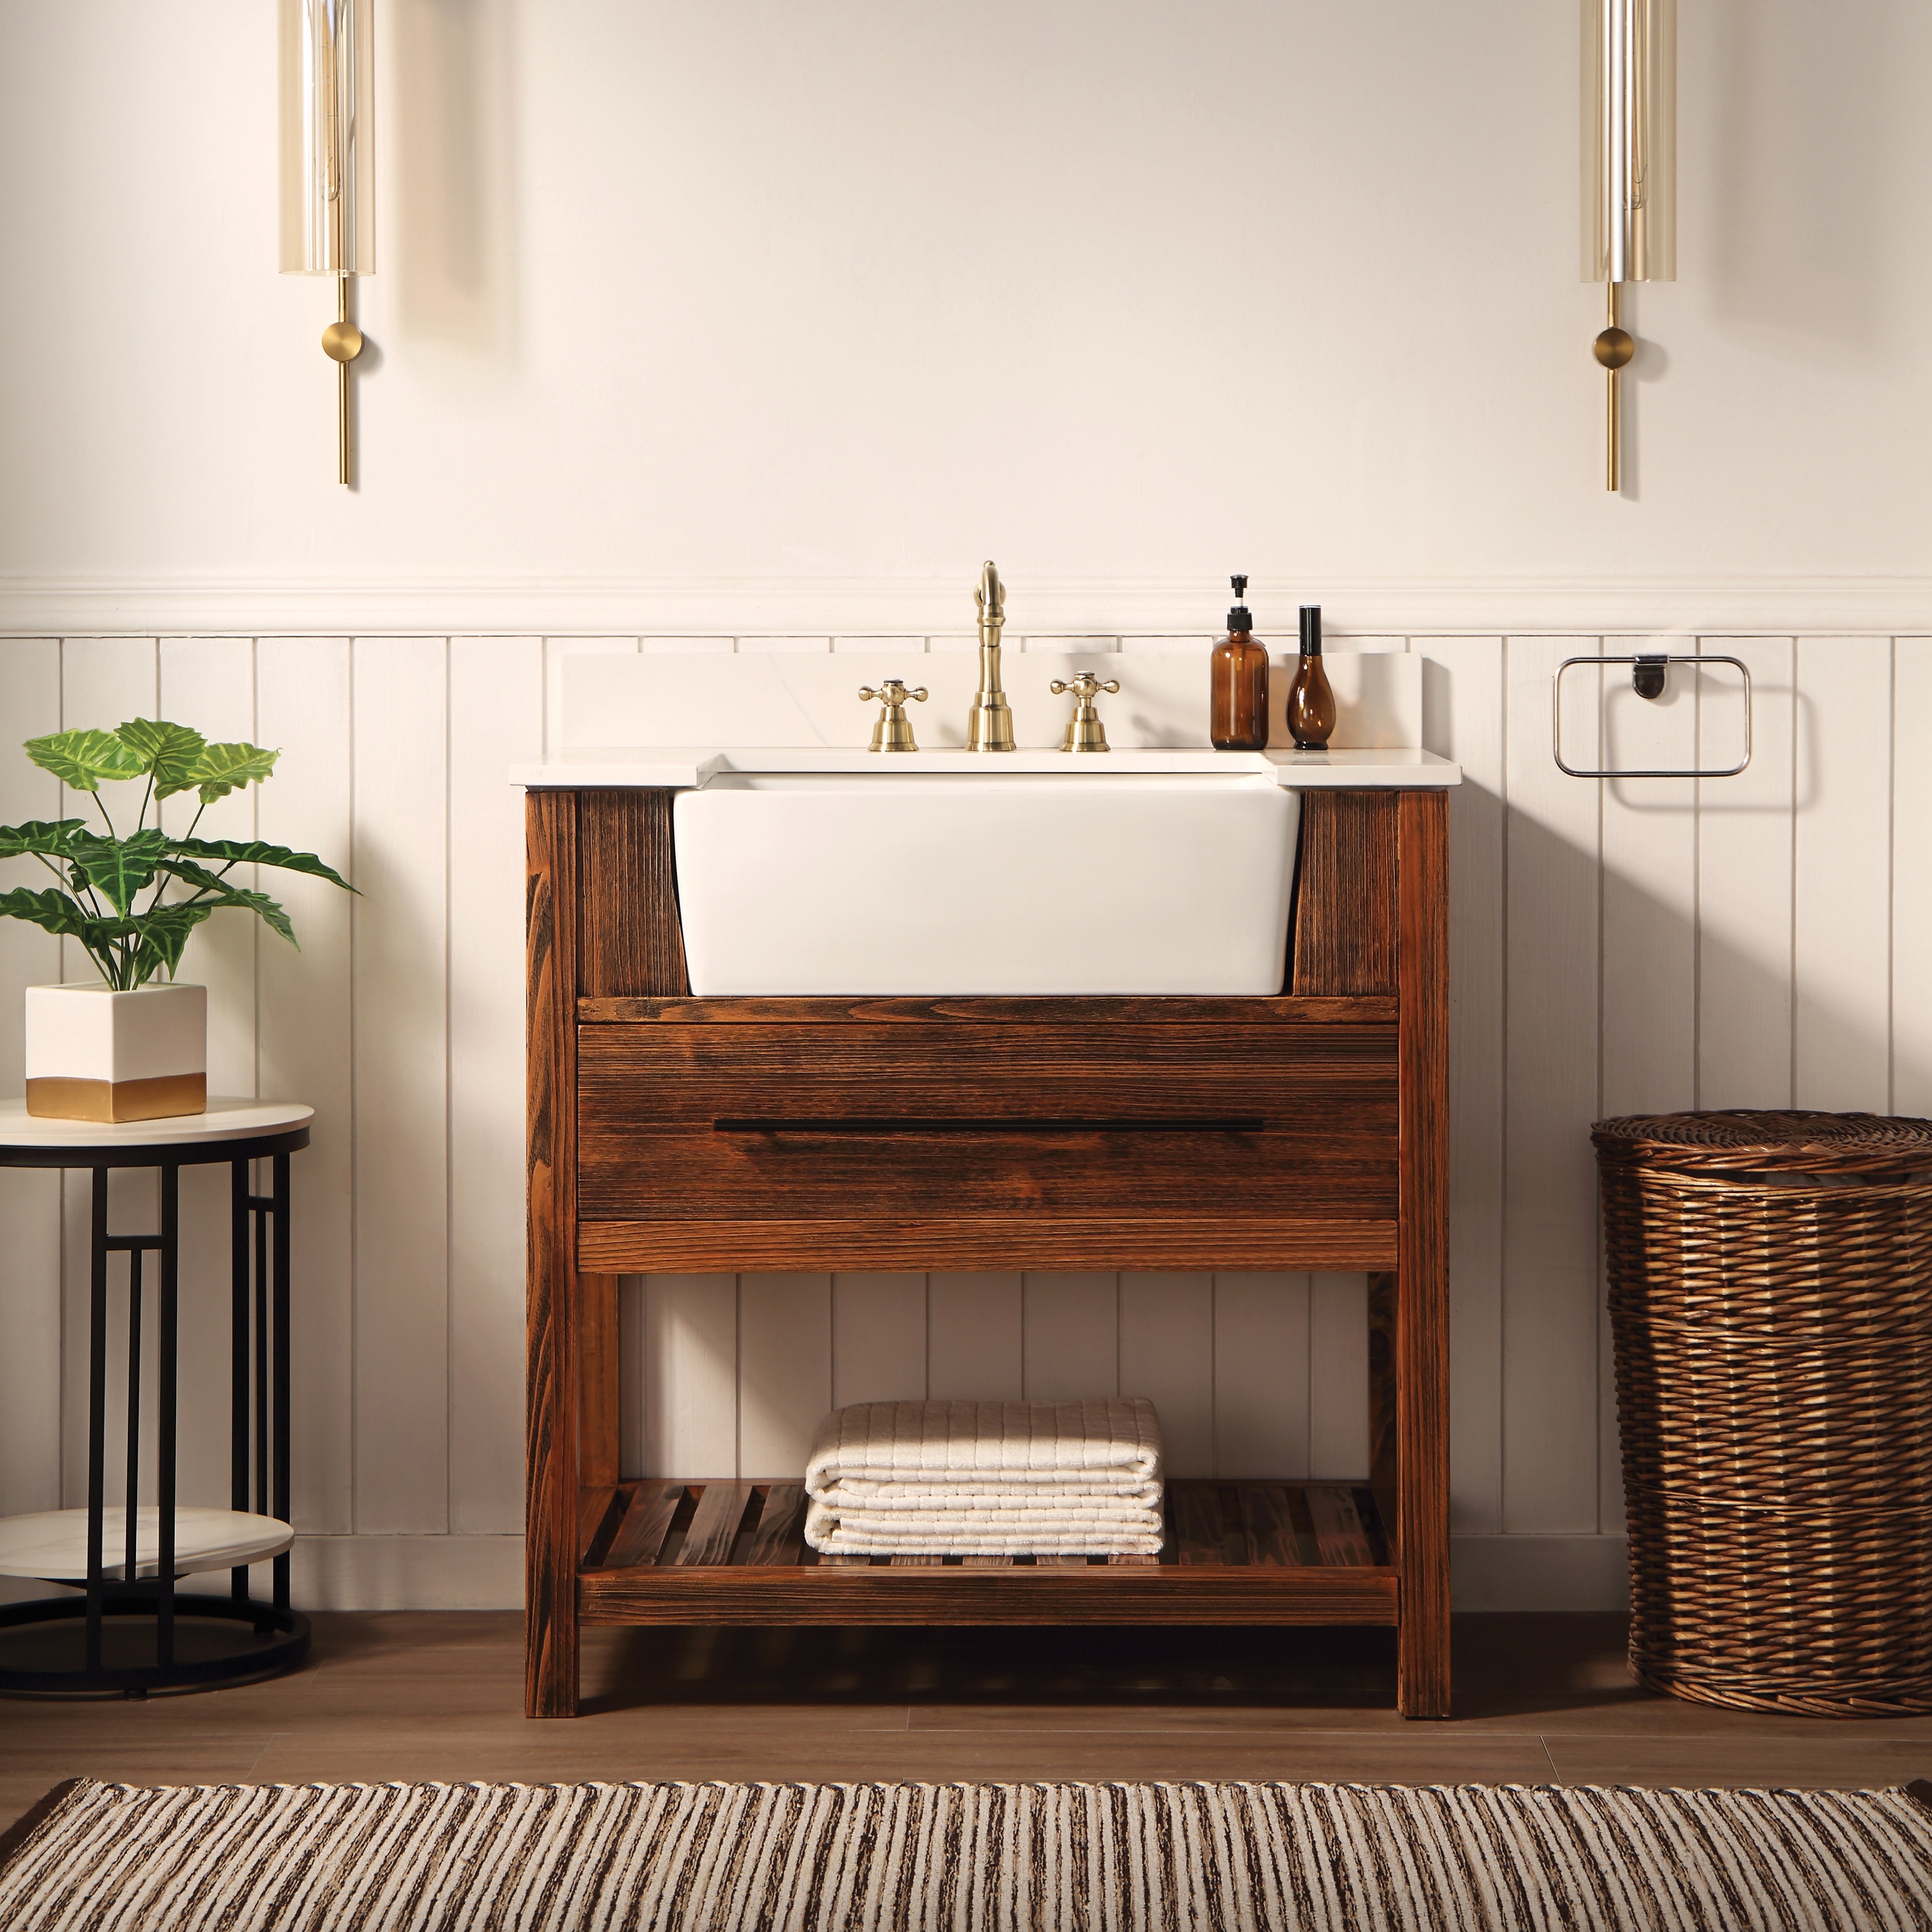 https://ak1.ostkcdn.com/images/products/is/images/direct/ec2e67990f06d2356aa976a0e679e5007355424c/Louise-36in-Bath-Vanity.jpg